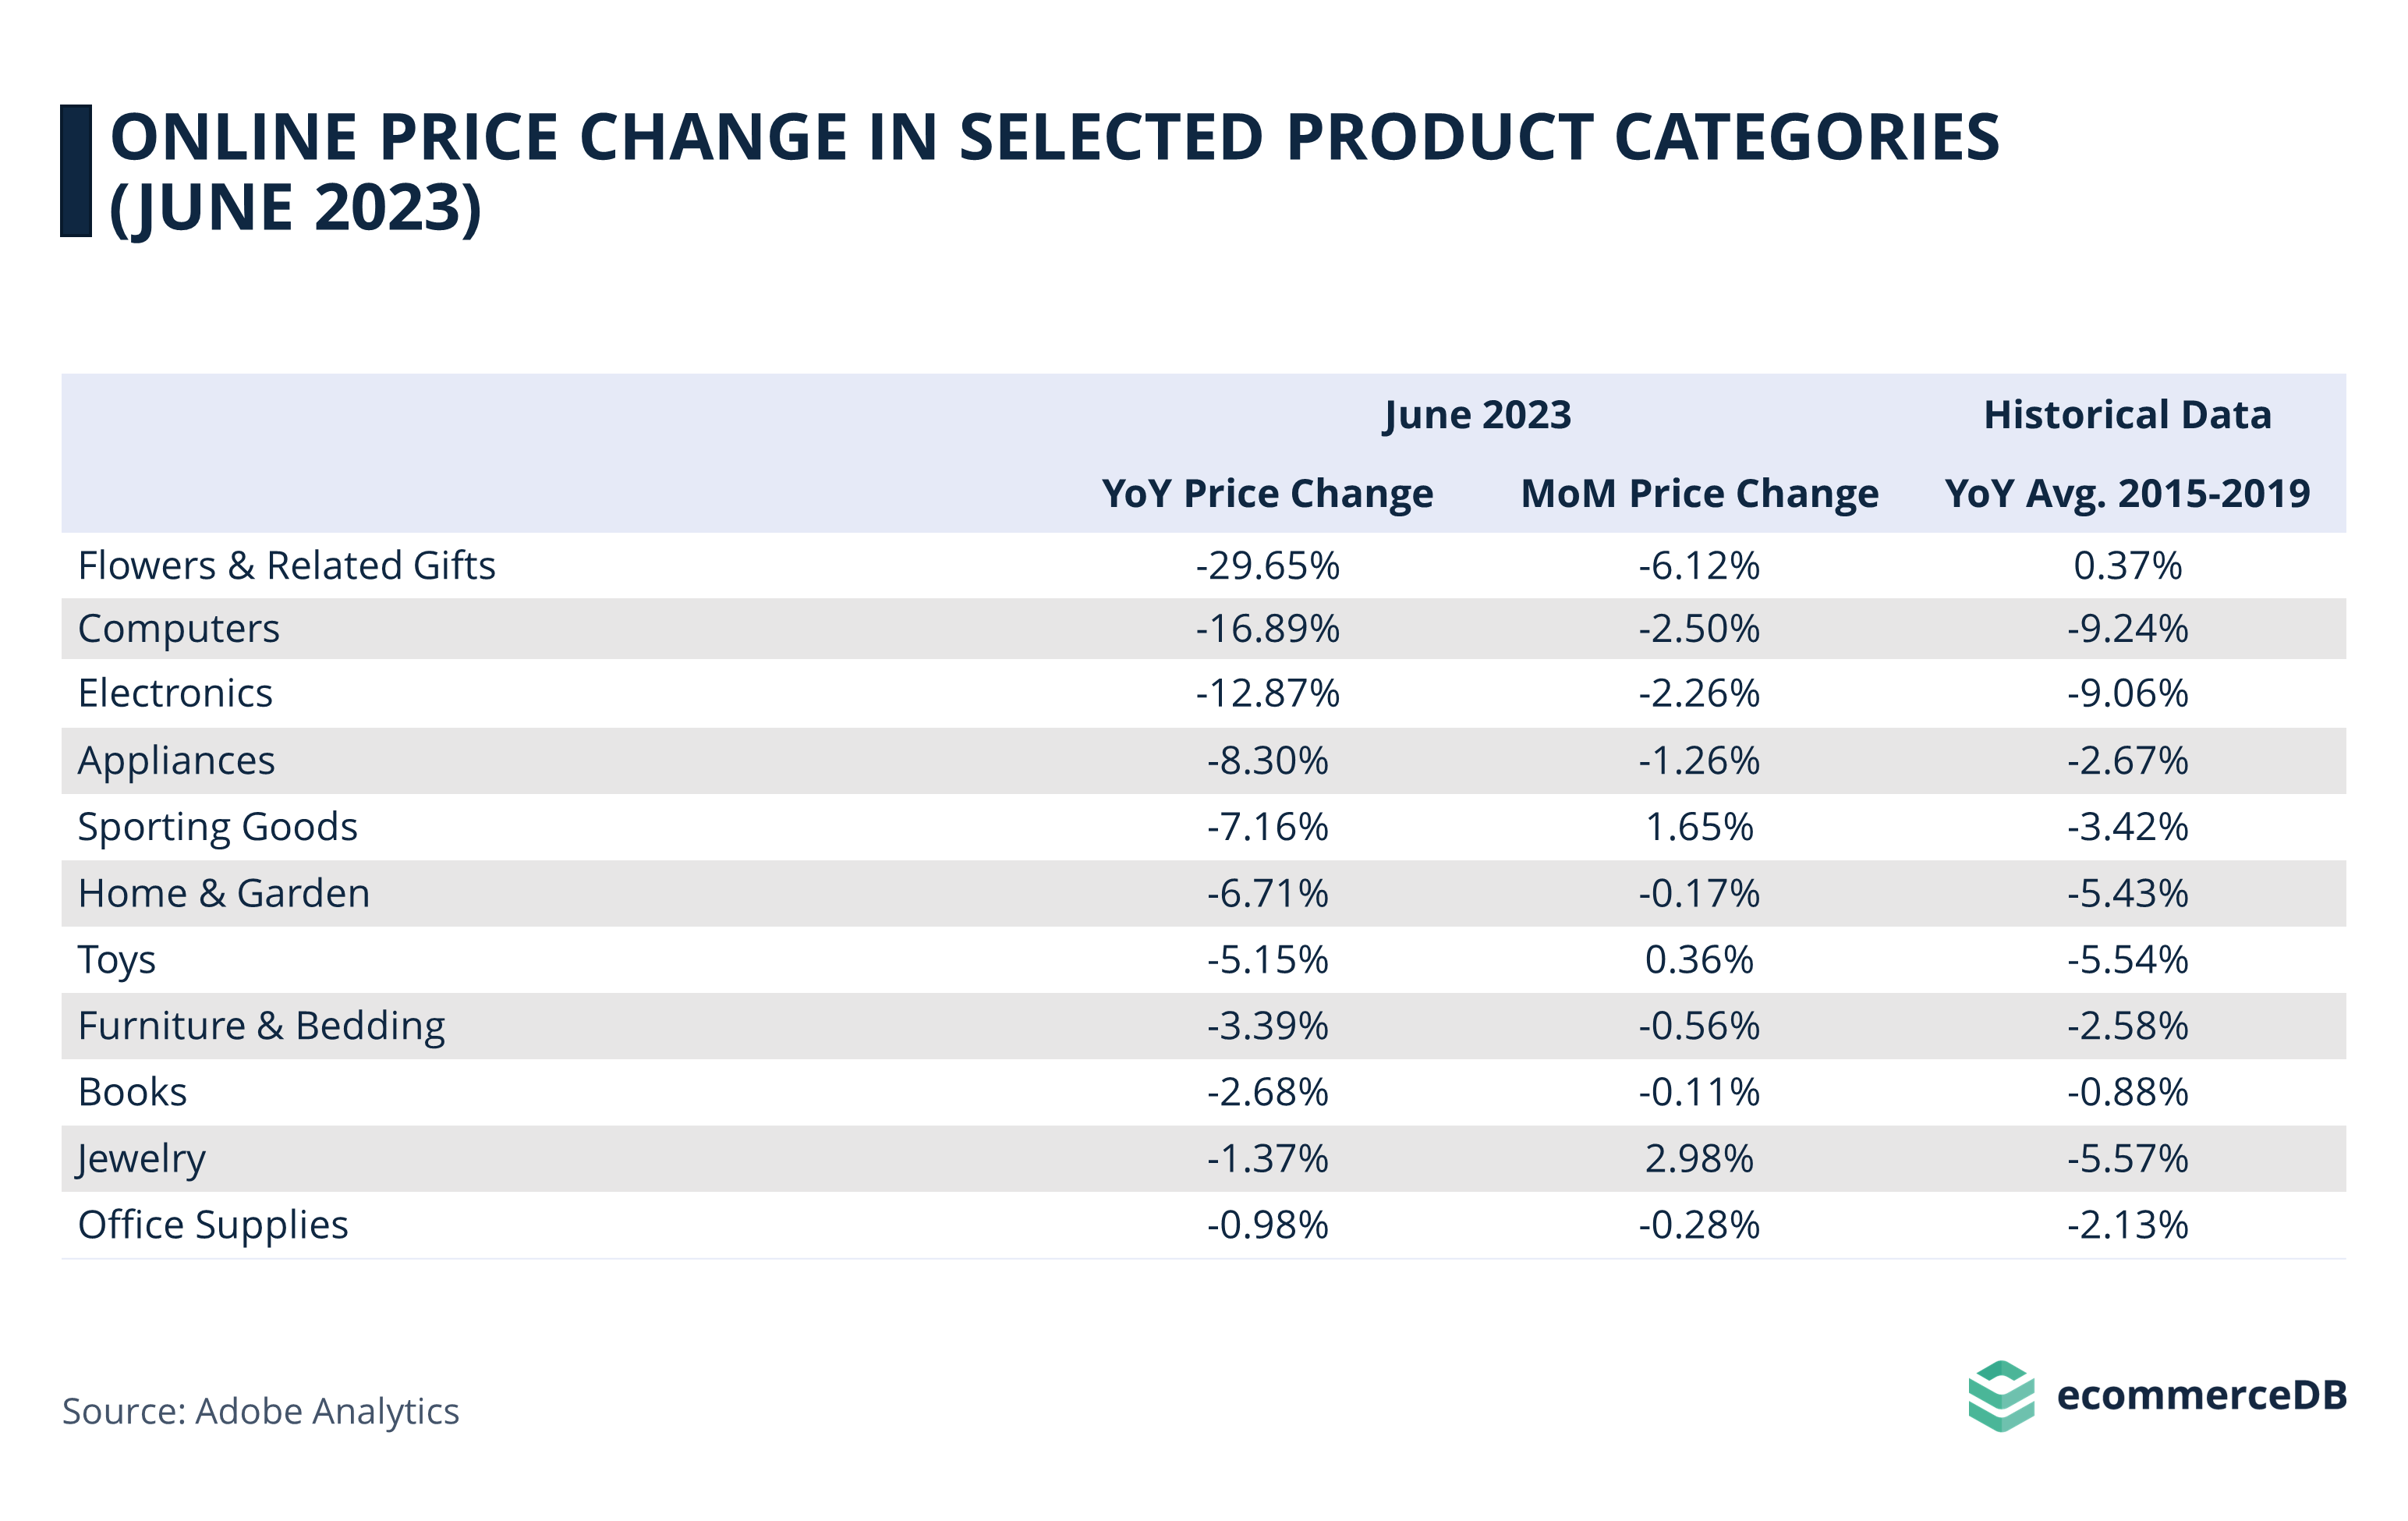 Online Price Change in Selected Product Categories (June 2023)